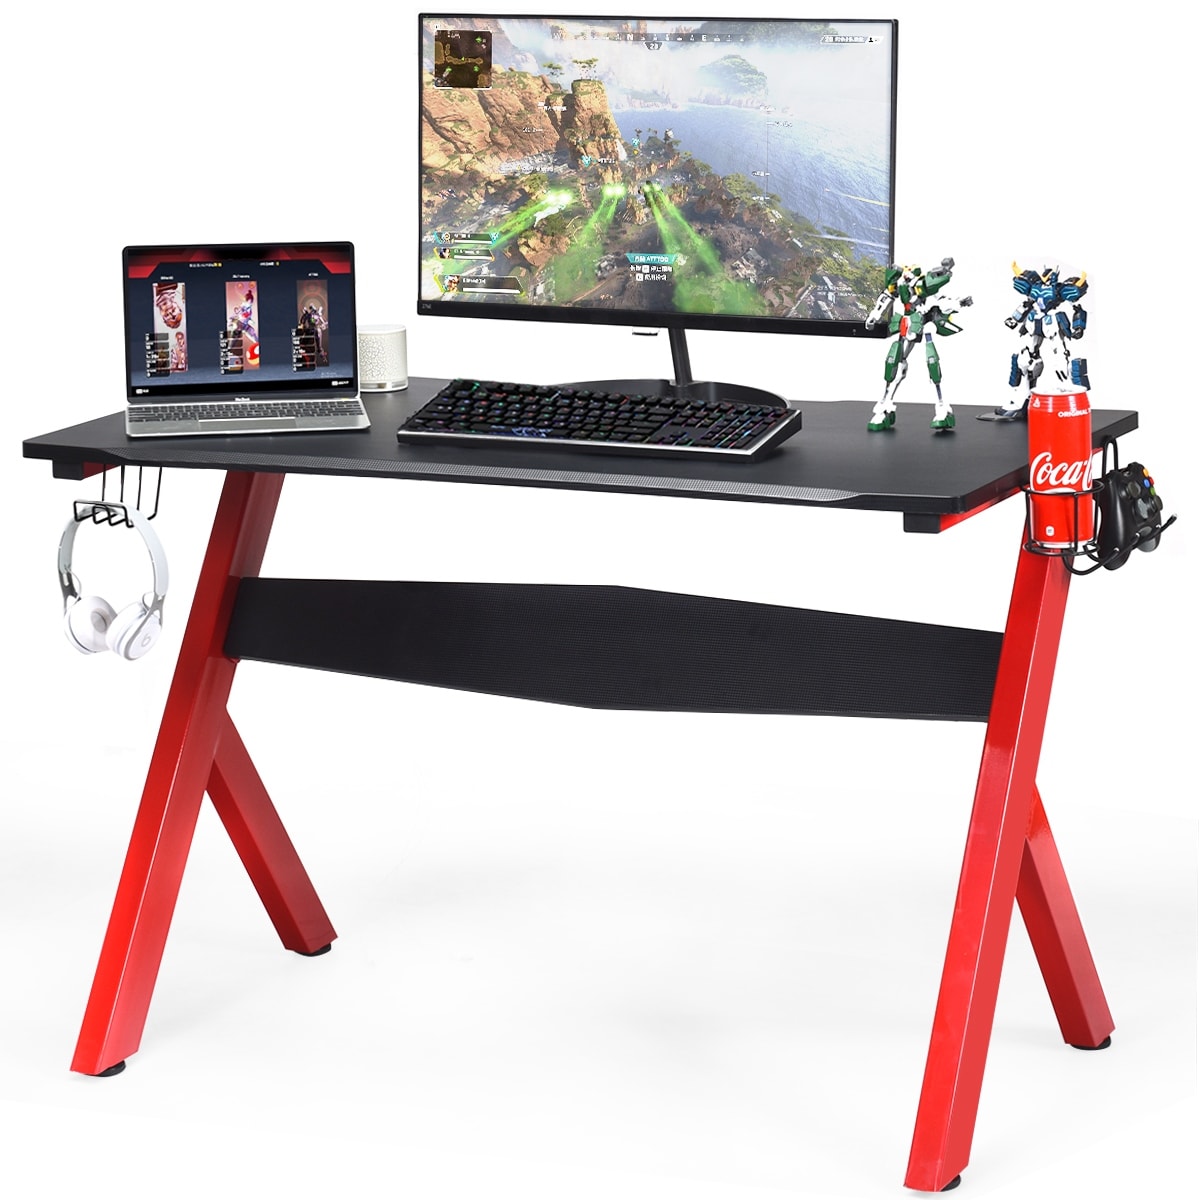 https://ak1.ostkcdn.com/images/products/is/images/direct/bf610ac0336bd6ea5ad0b982d6b8f67c536cd5ff/Costway-Gaming-Desk-Computer-Desk-w-Controller-Stand-Cup-Holder-Headphone-Hook-Mouse-Pad.jpg